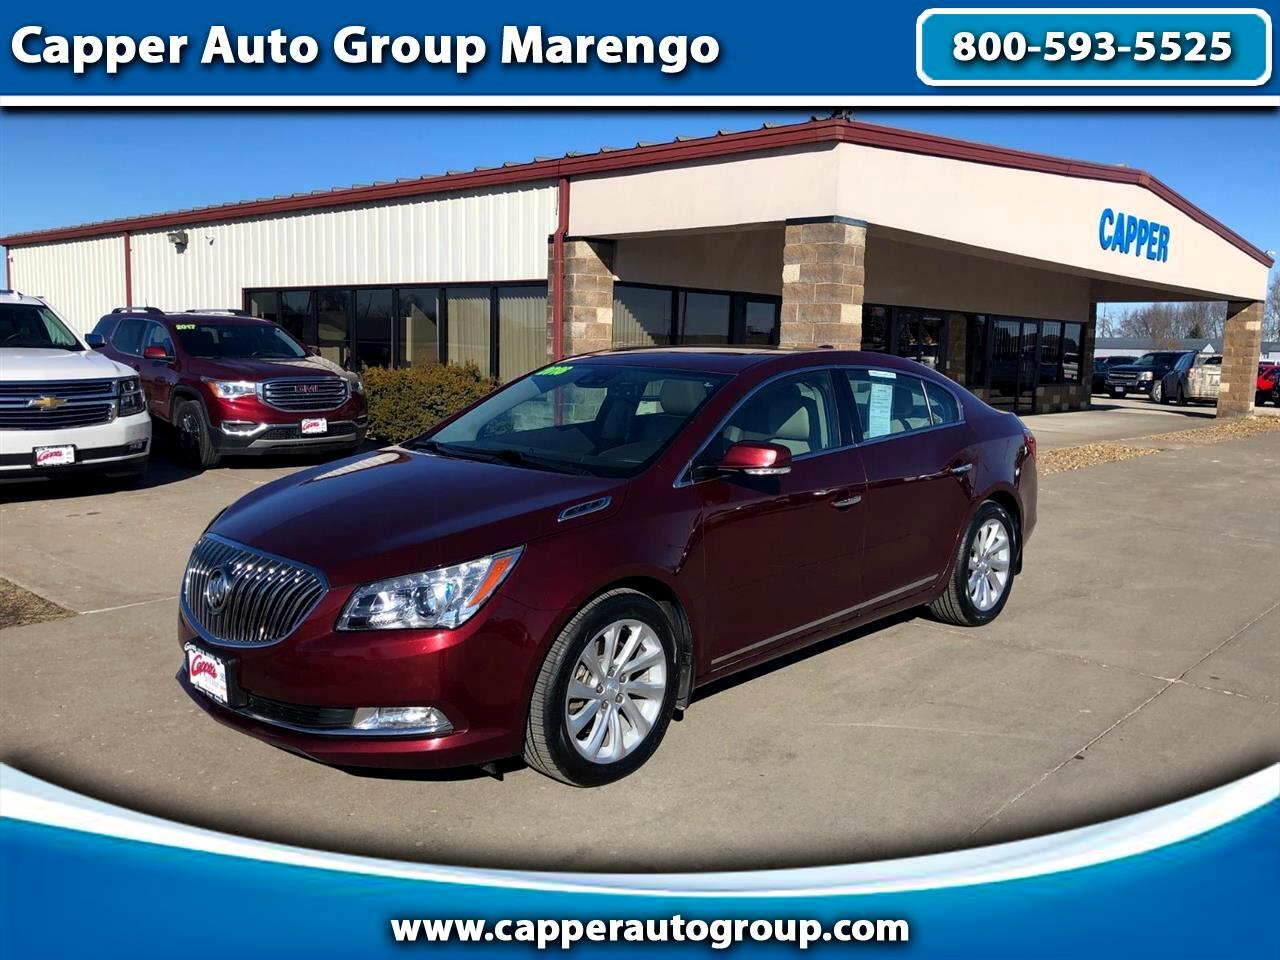 2016 Buick LaCrosse 4dr Sdn Leather FWD